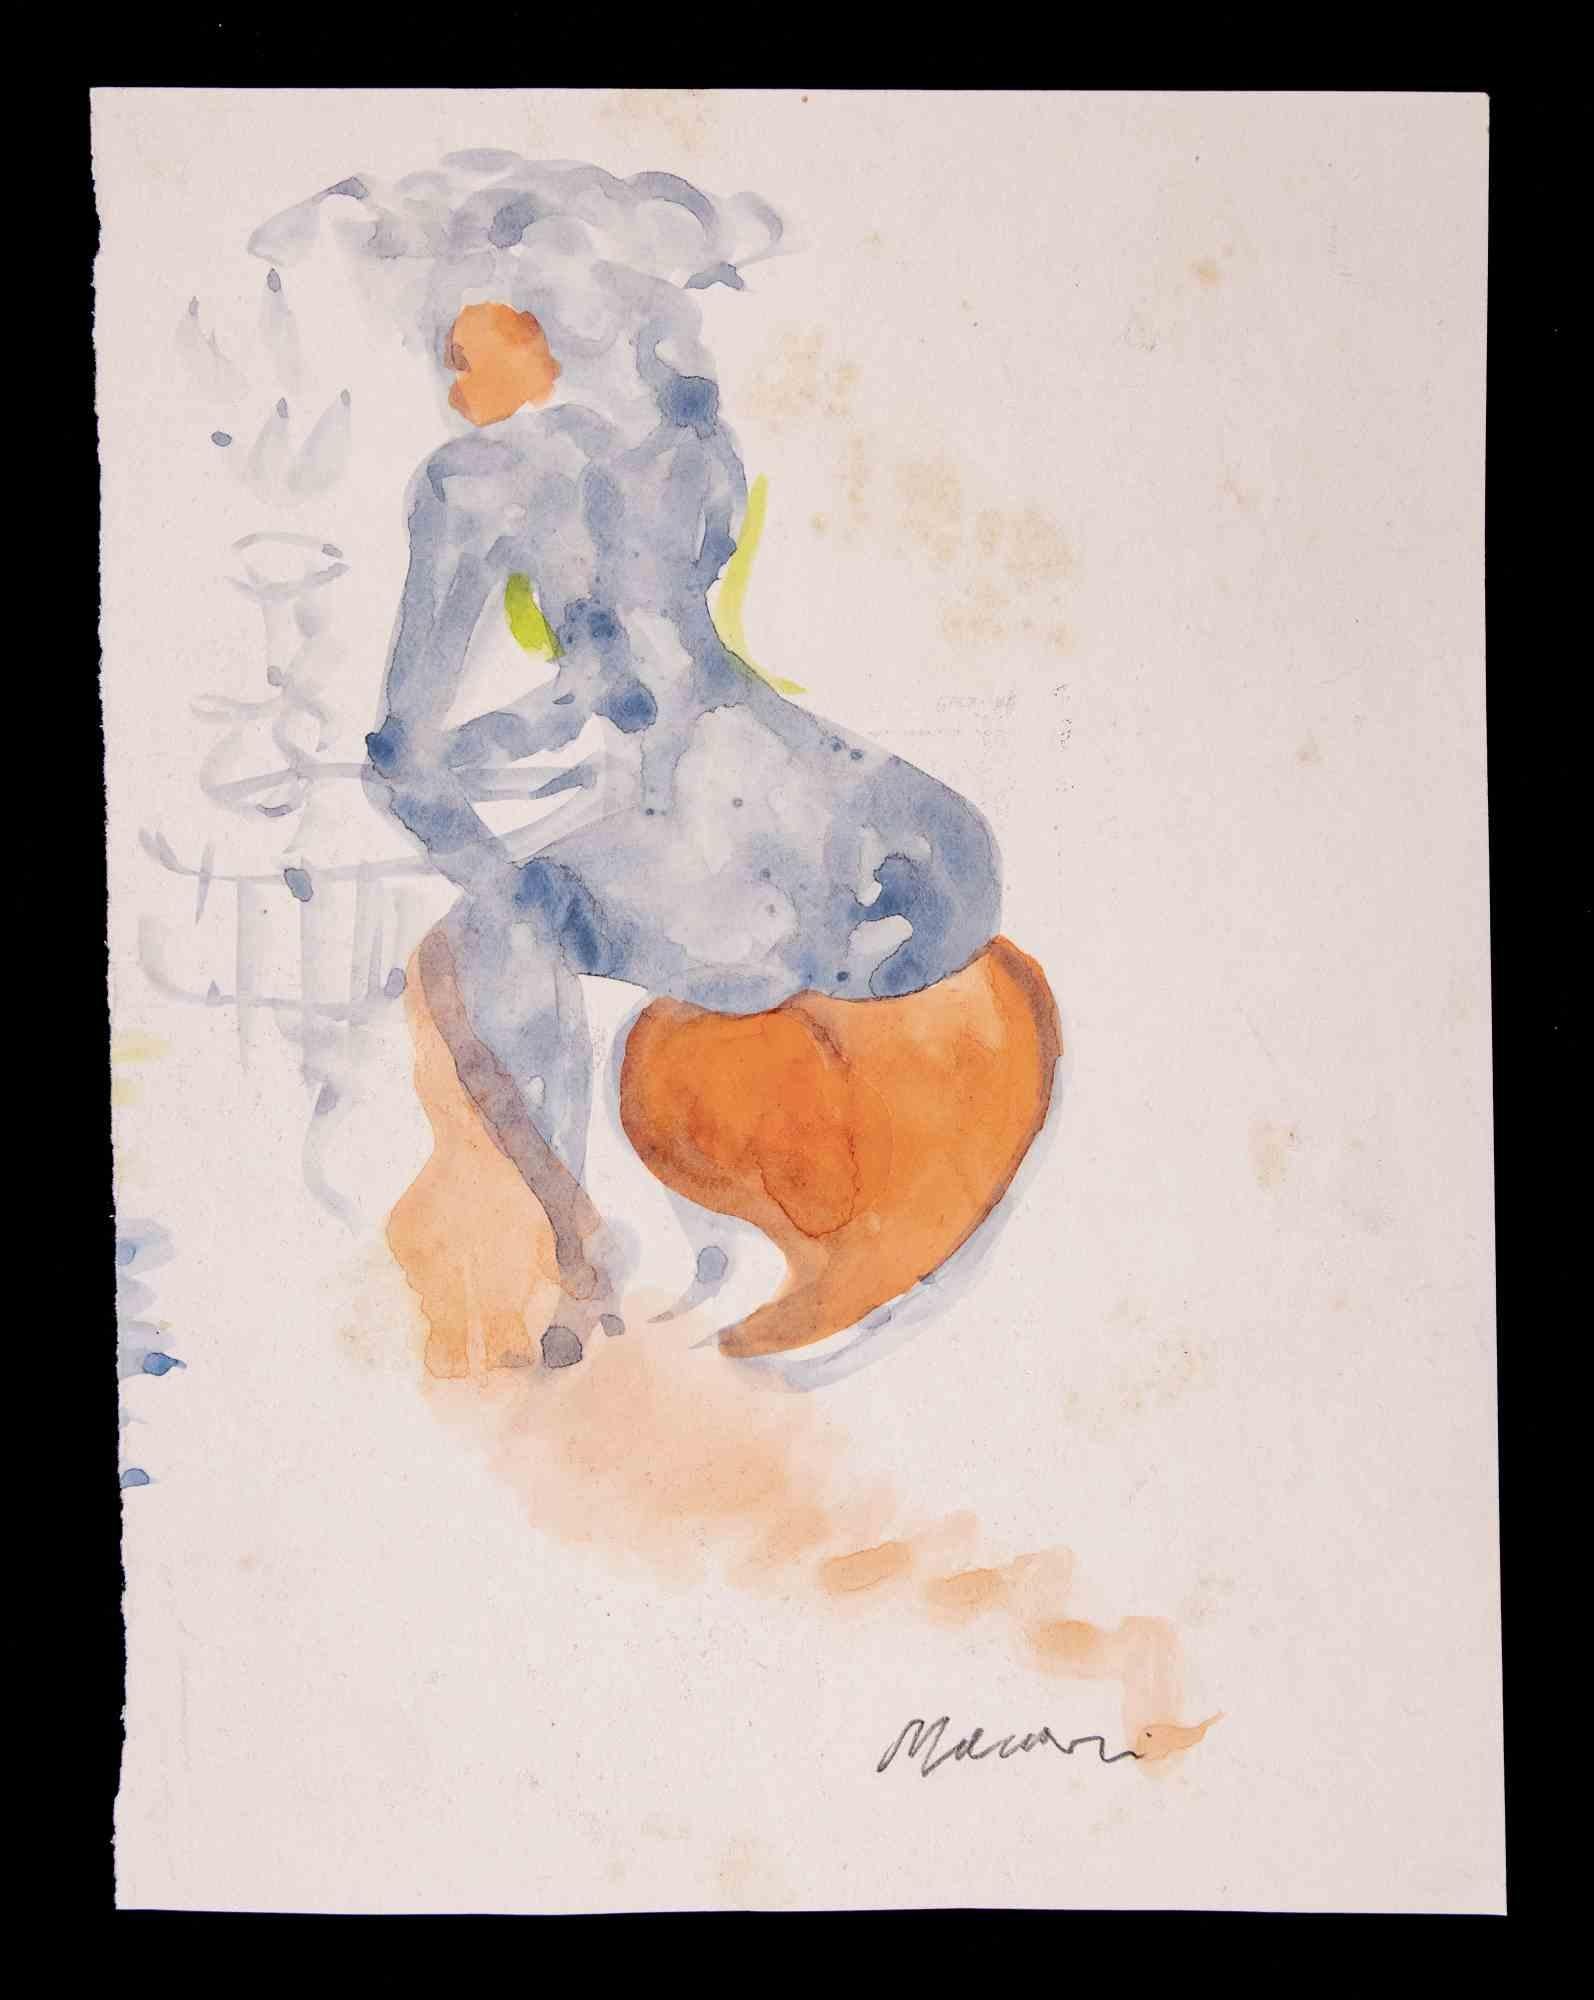 Two Hearts is a Watercolor Drawing realized by Mino Maccari (1924-1989) in 1950s.

Hand-signed on the lower margin.

Good condition on a little paper.

Mino Maccari (Siena, 1924-Rome, June 16, 1989) was an Italian writer, painter, engraver and